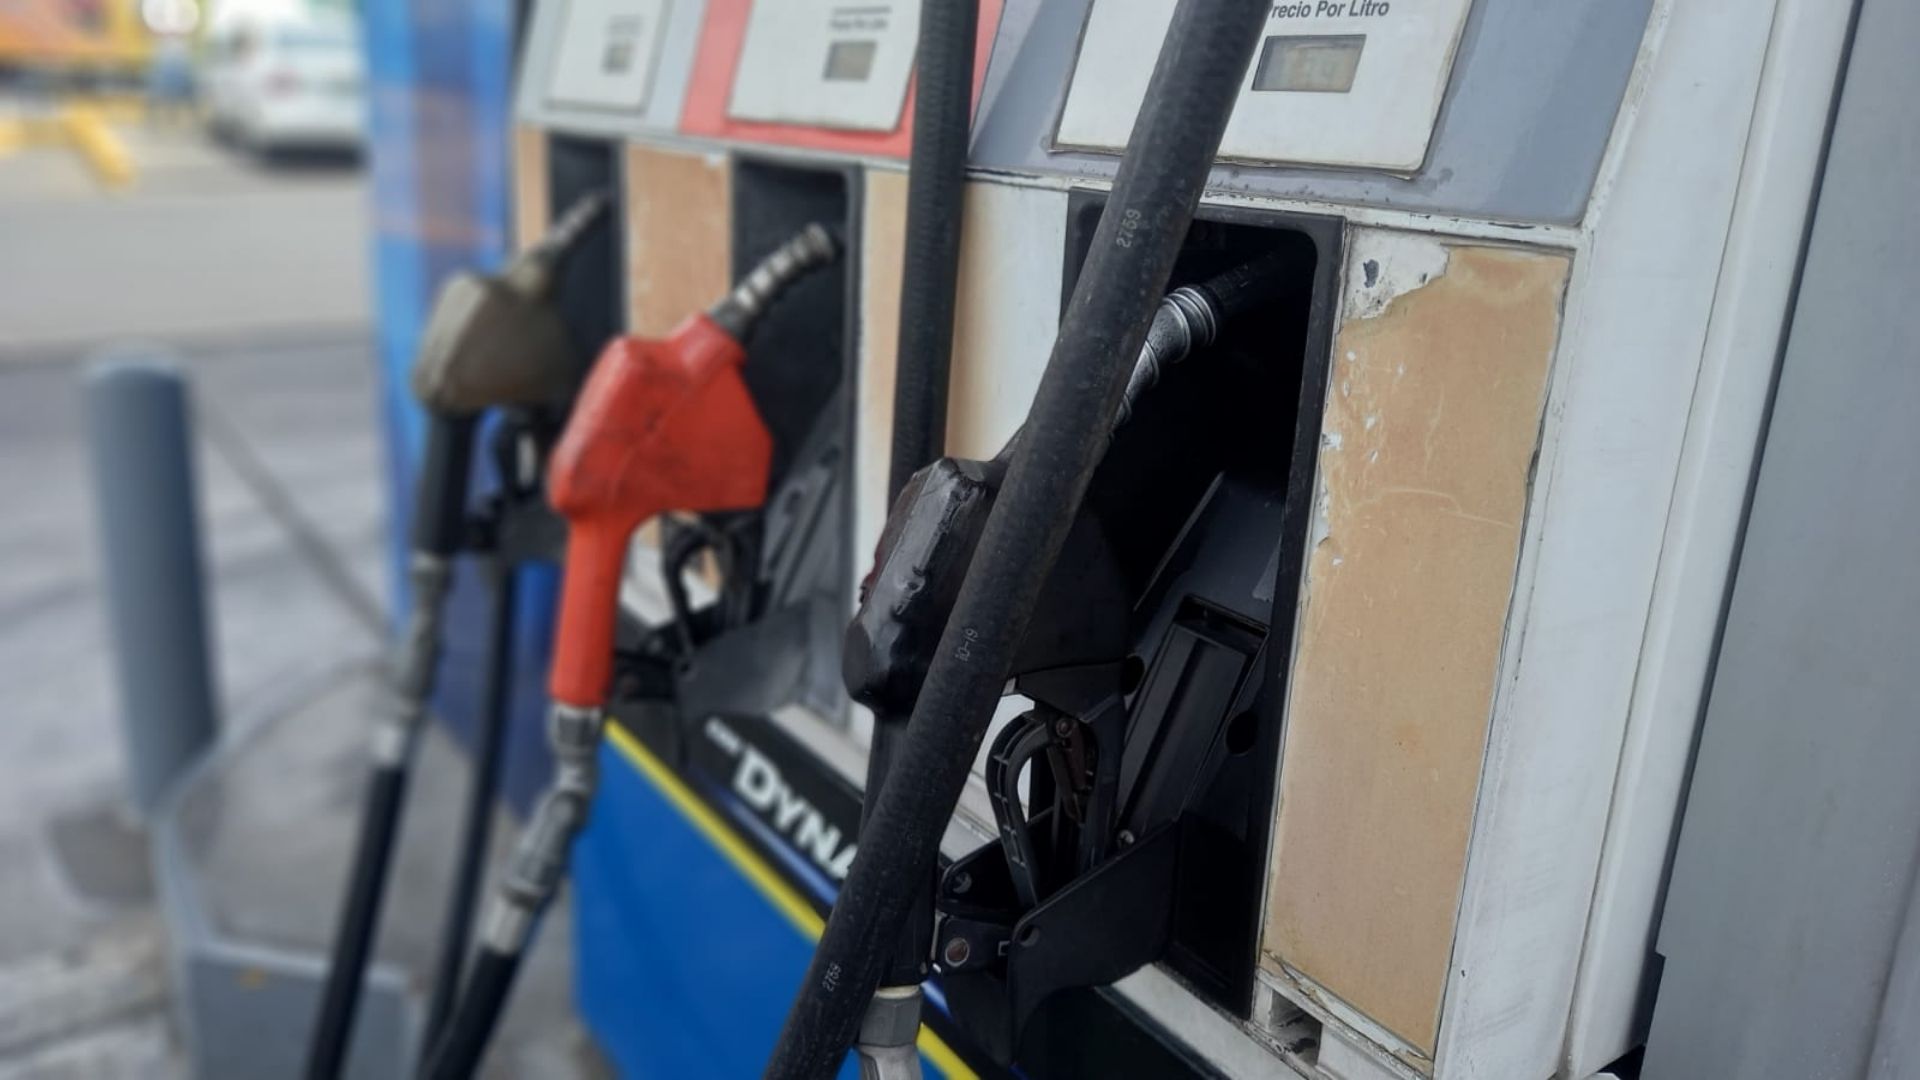 Opponents promote stoppage of fuel consumption as of June 1 in Nicaragua